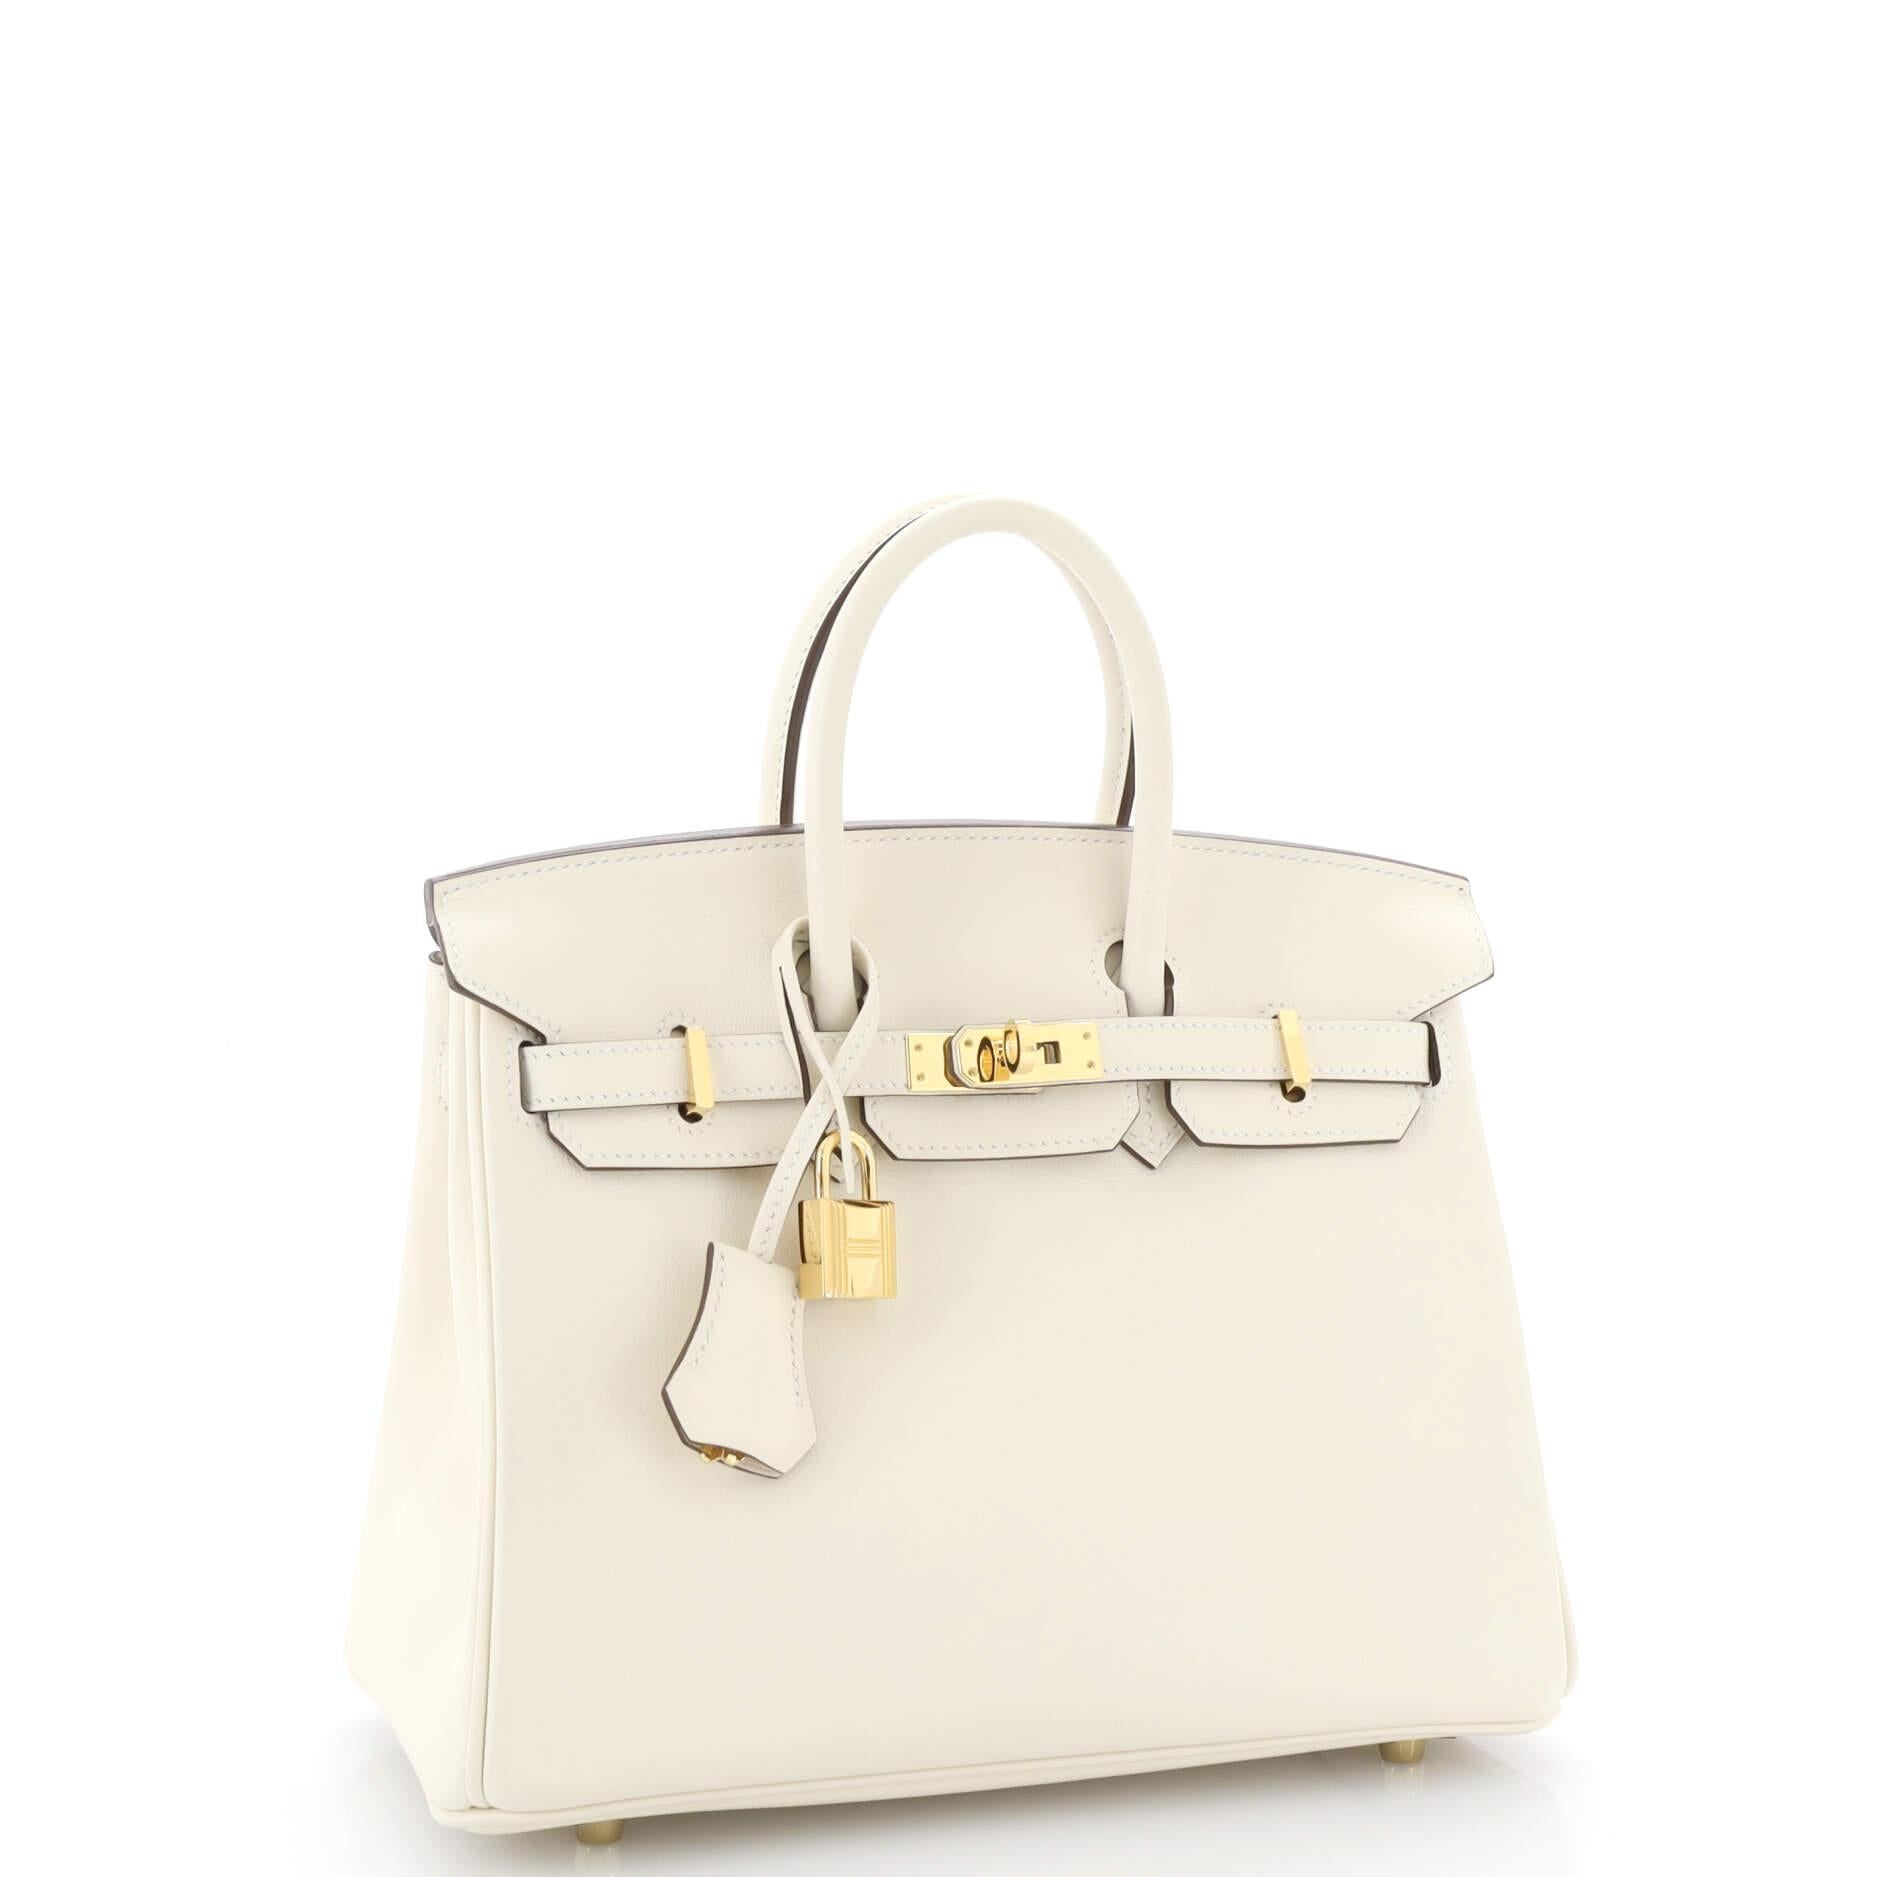 Hermes Birkin Handbag Light Swift with Gold Hardware 25 In Good Condition For Sale In NY, NY